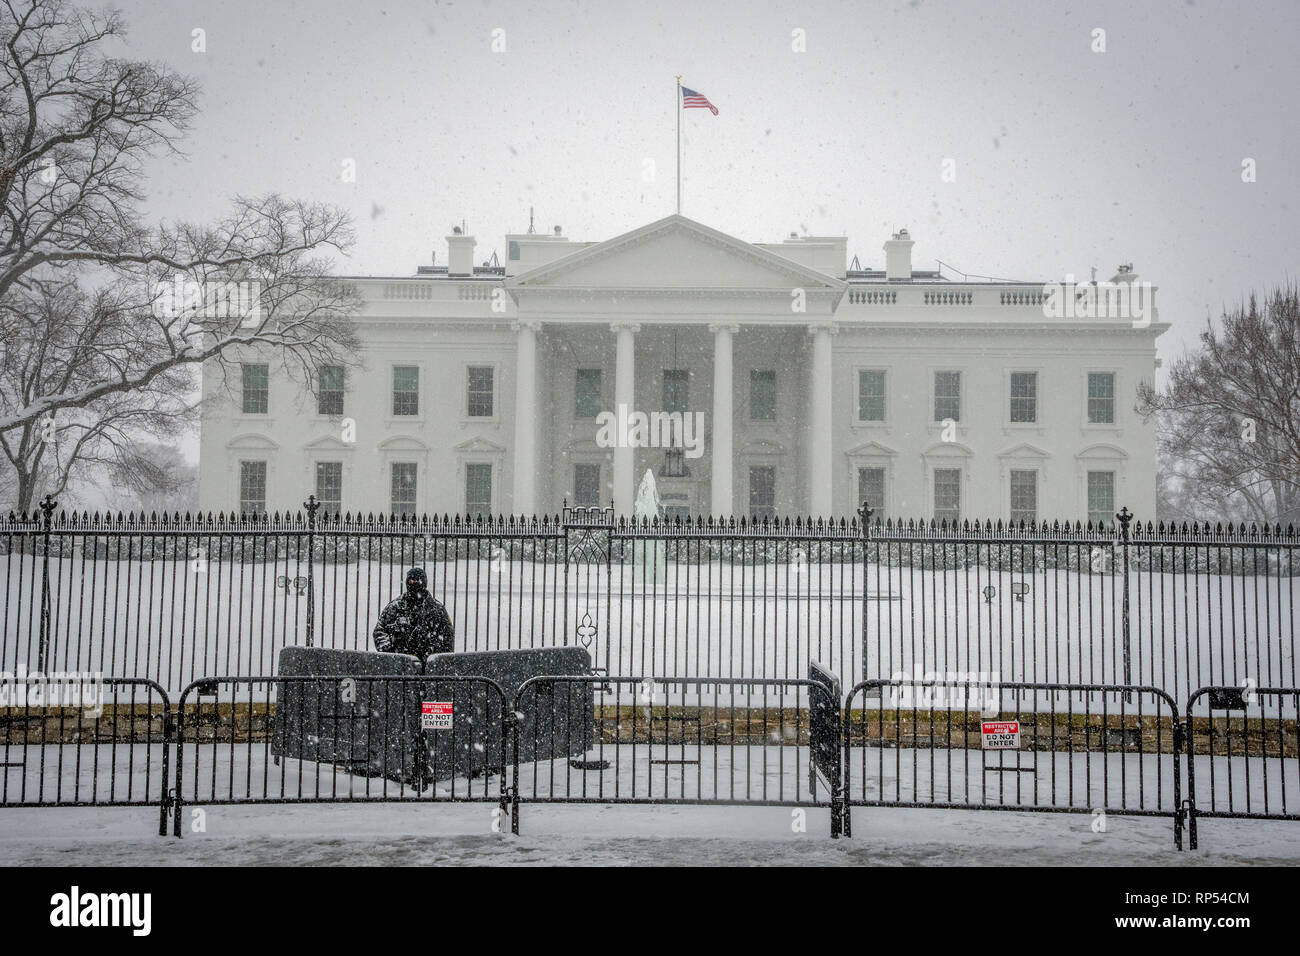 A Secret Service guard stands watch in front of the north portico of the White House, February 20, 2019. Stock Photo